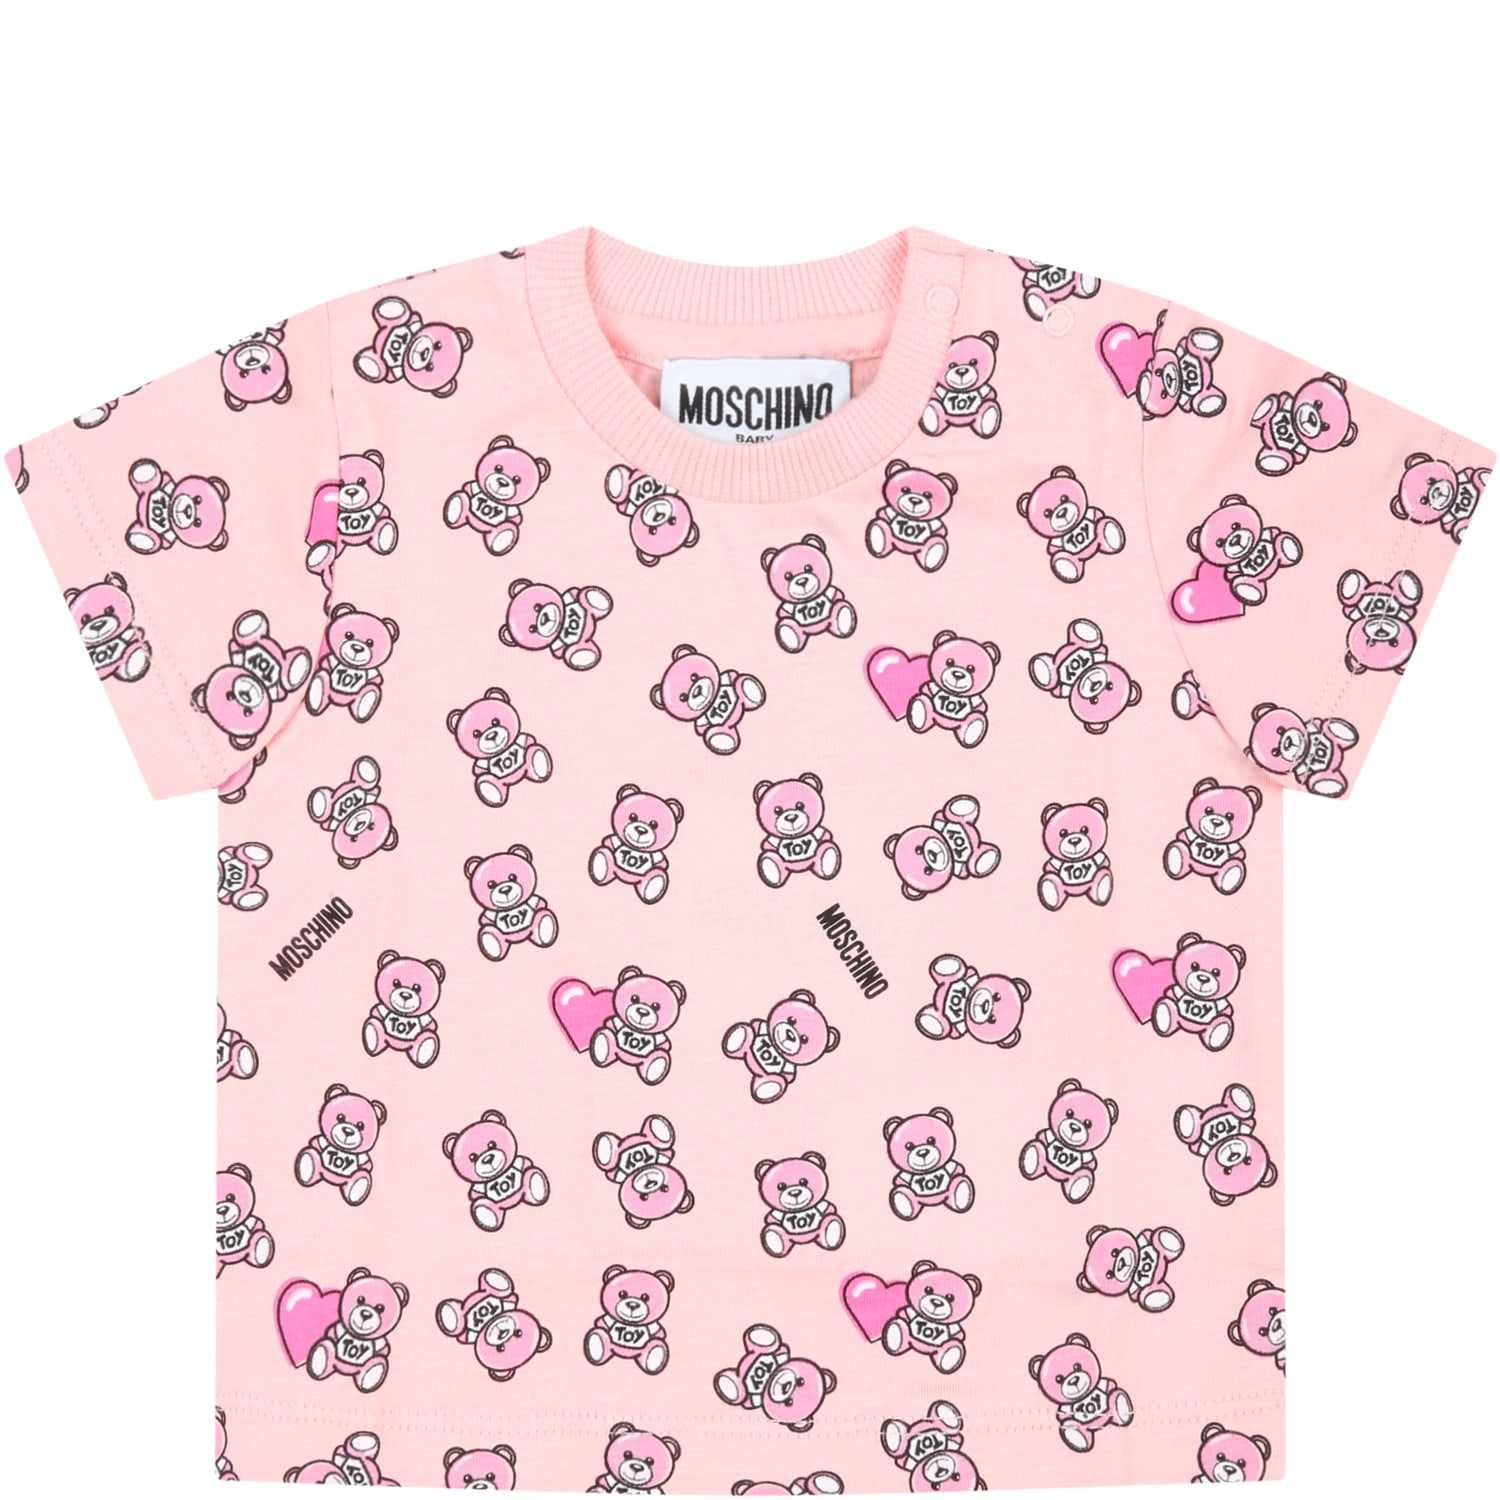 Moschino Pink T-shirt For Babygirl With Teddy Bears